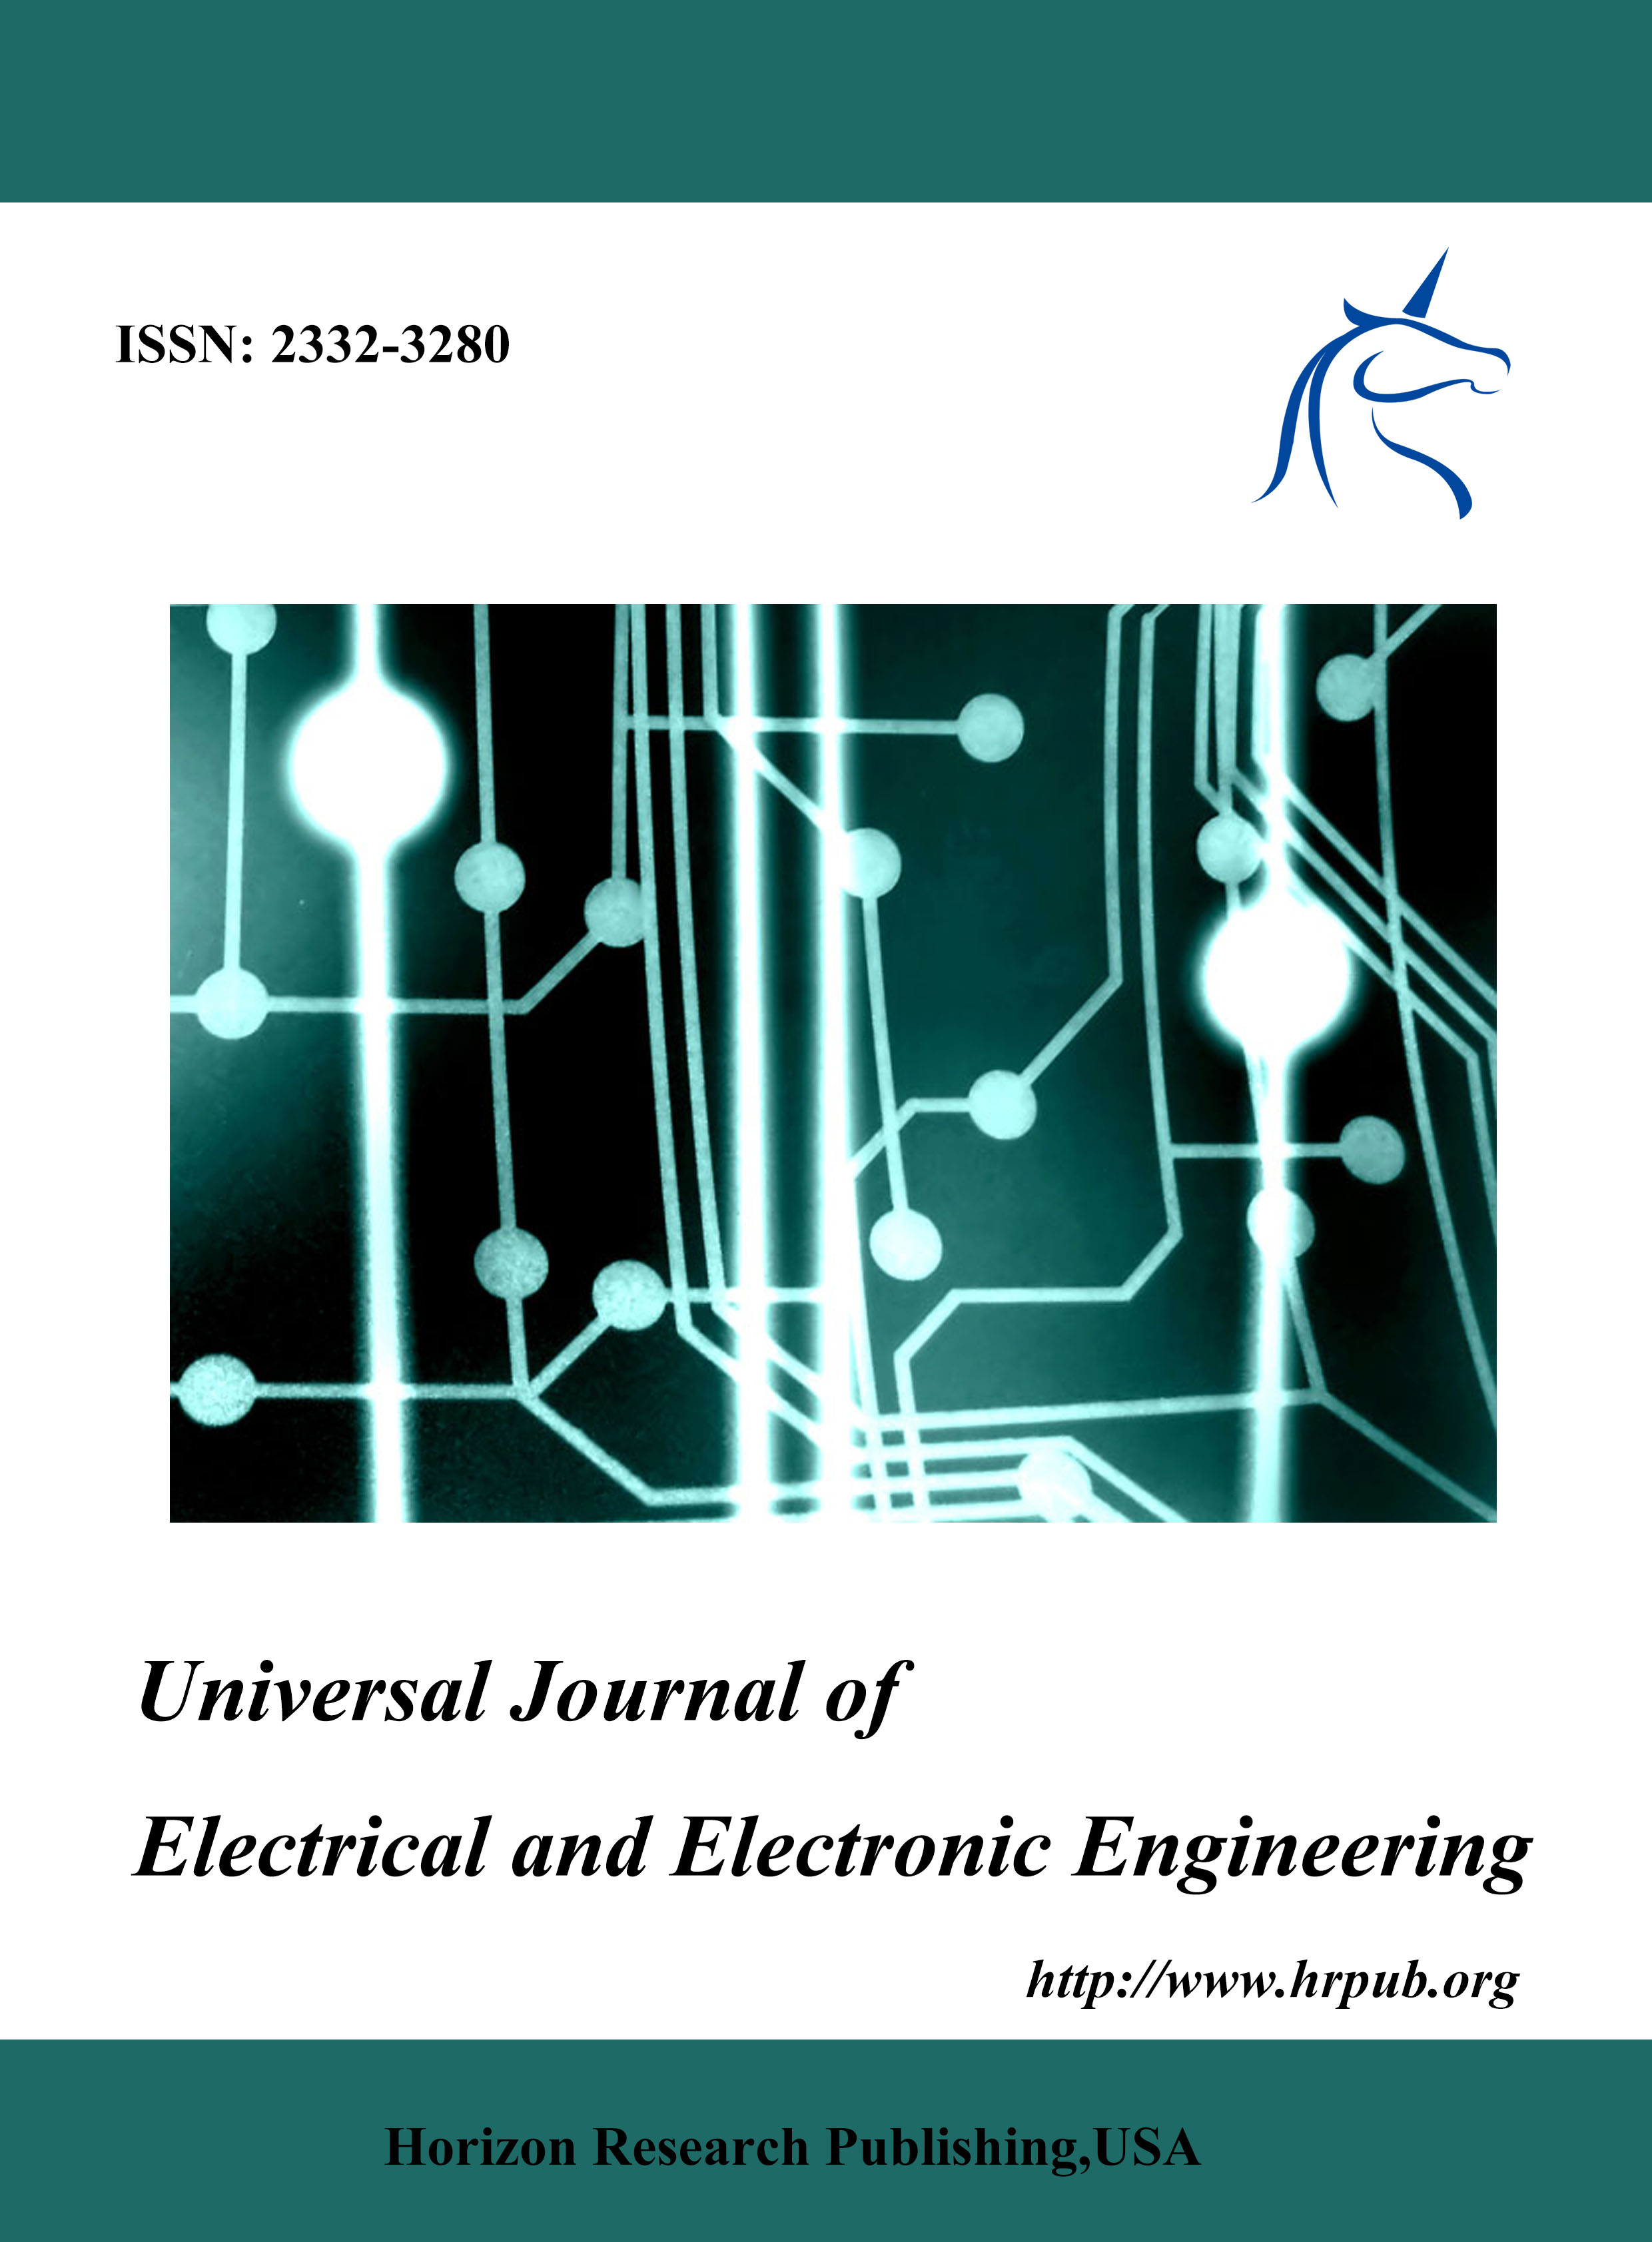 Universal Journal of Electrical and Electronic Engineering